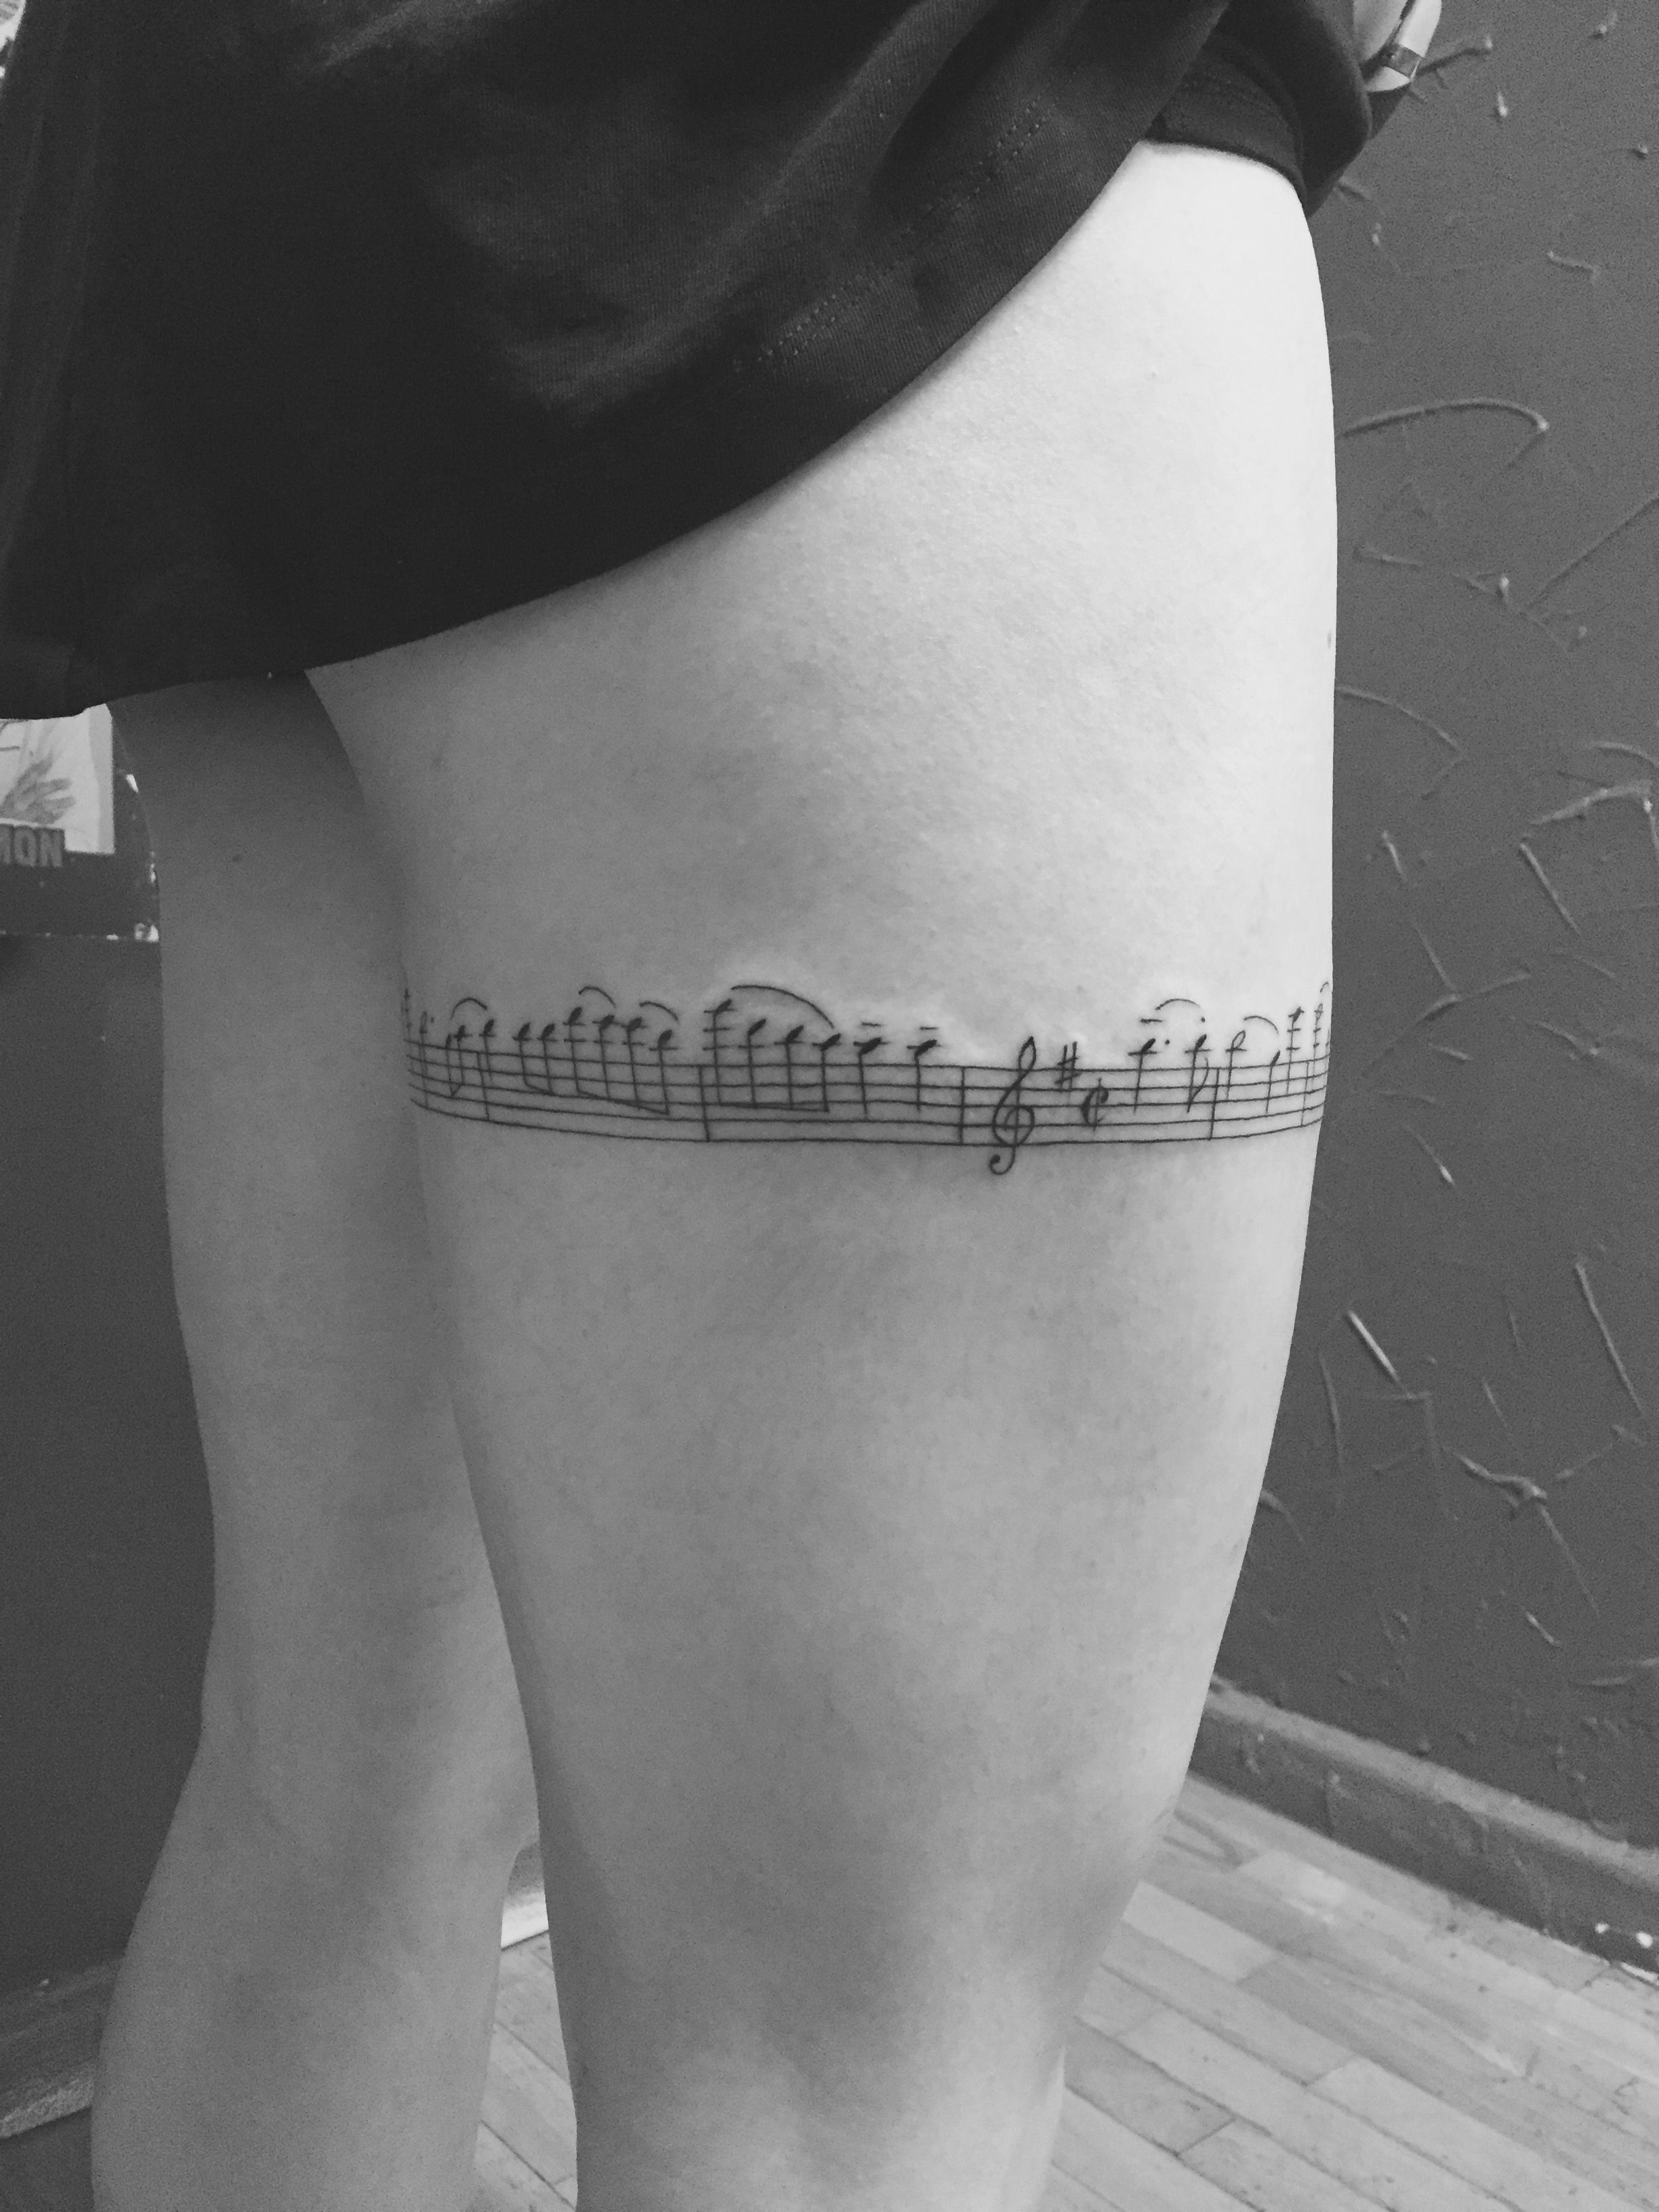 First Large Tattoo – Wraparound Music Staff On Thigh – Jay from Black Fish in NYC [NSFW]